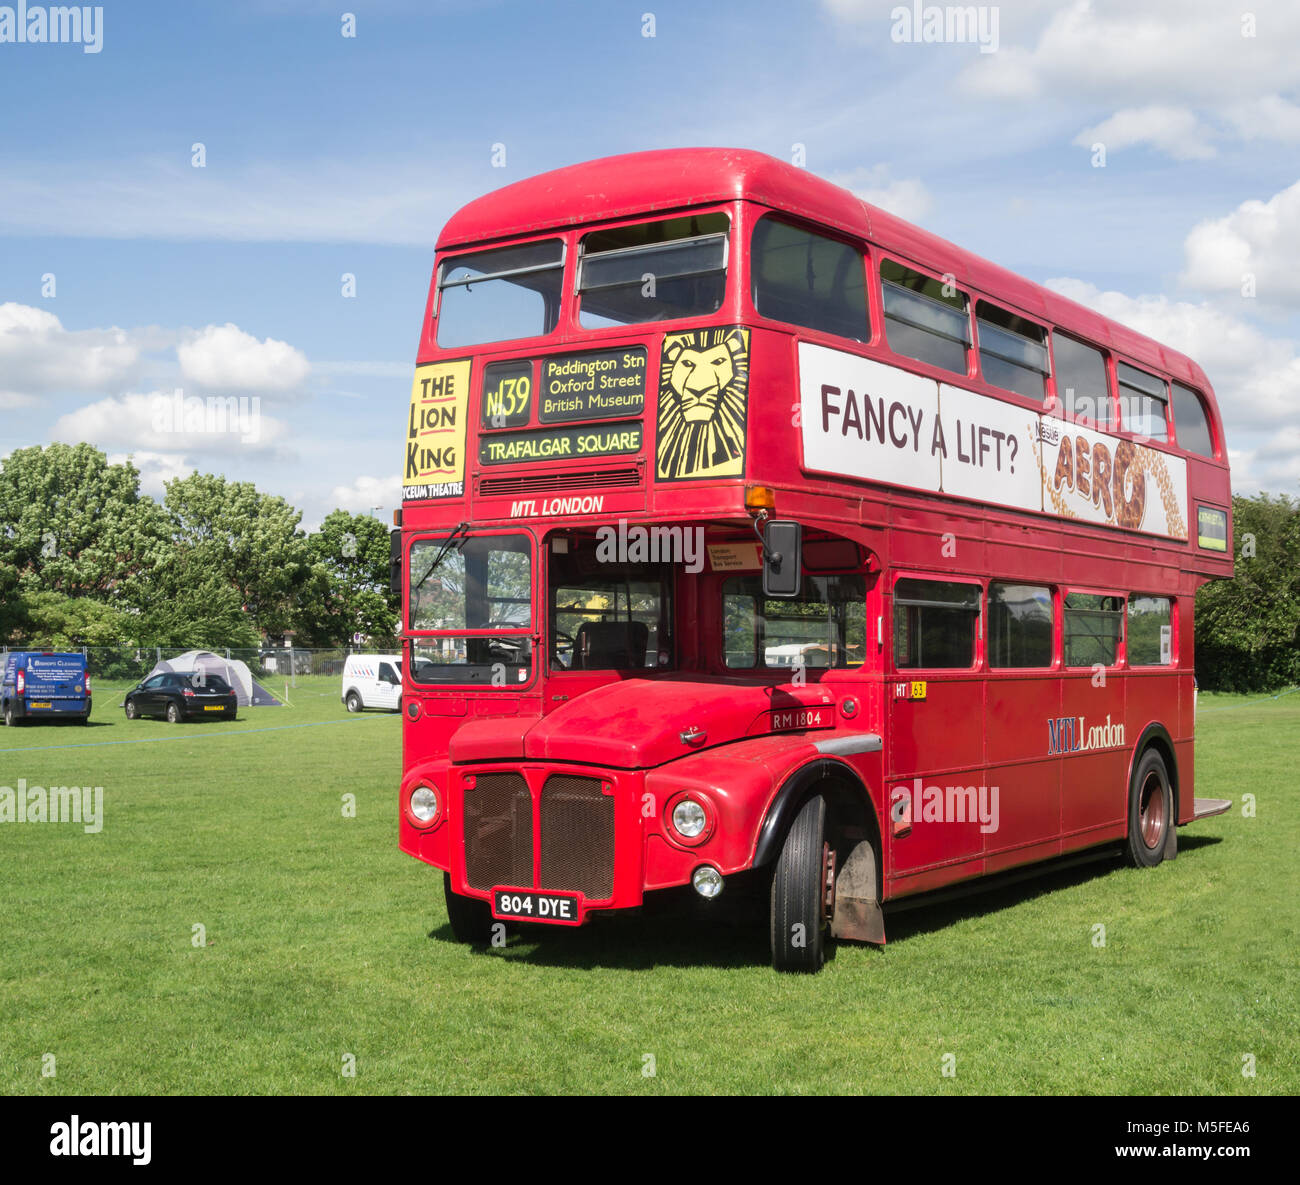 Enfield, London, UK - May 25 2014: Red London routemaster bus standing in a field on display. Stock Photo